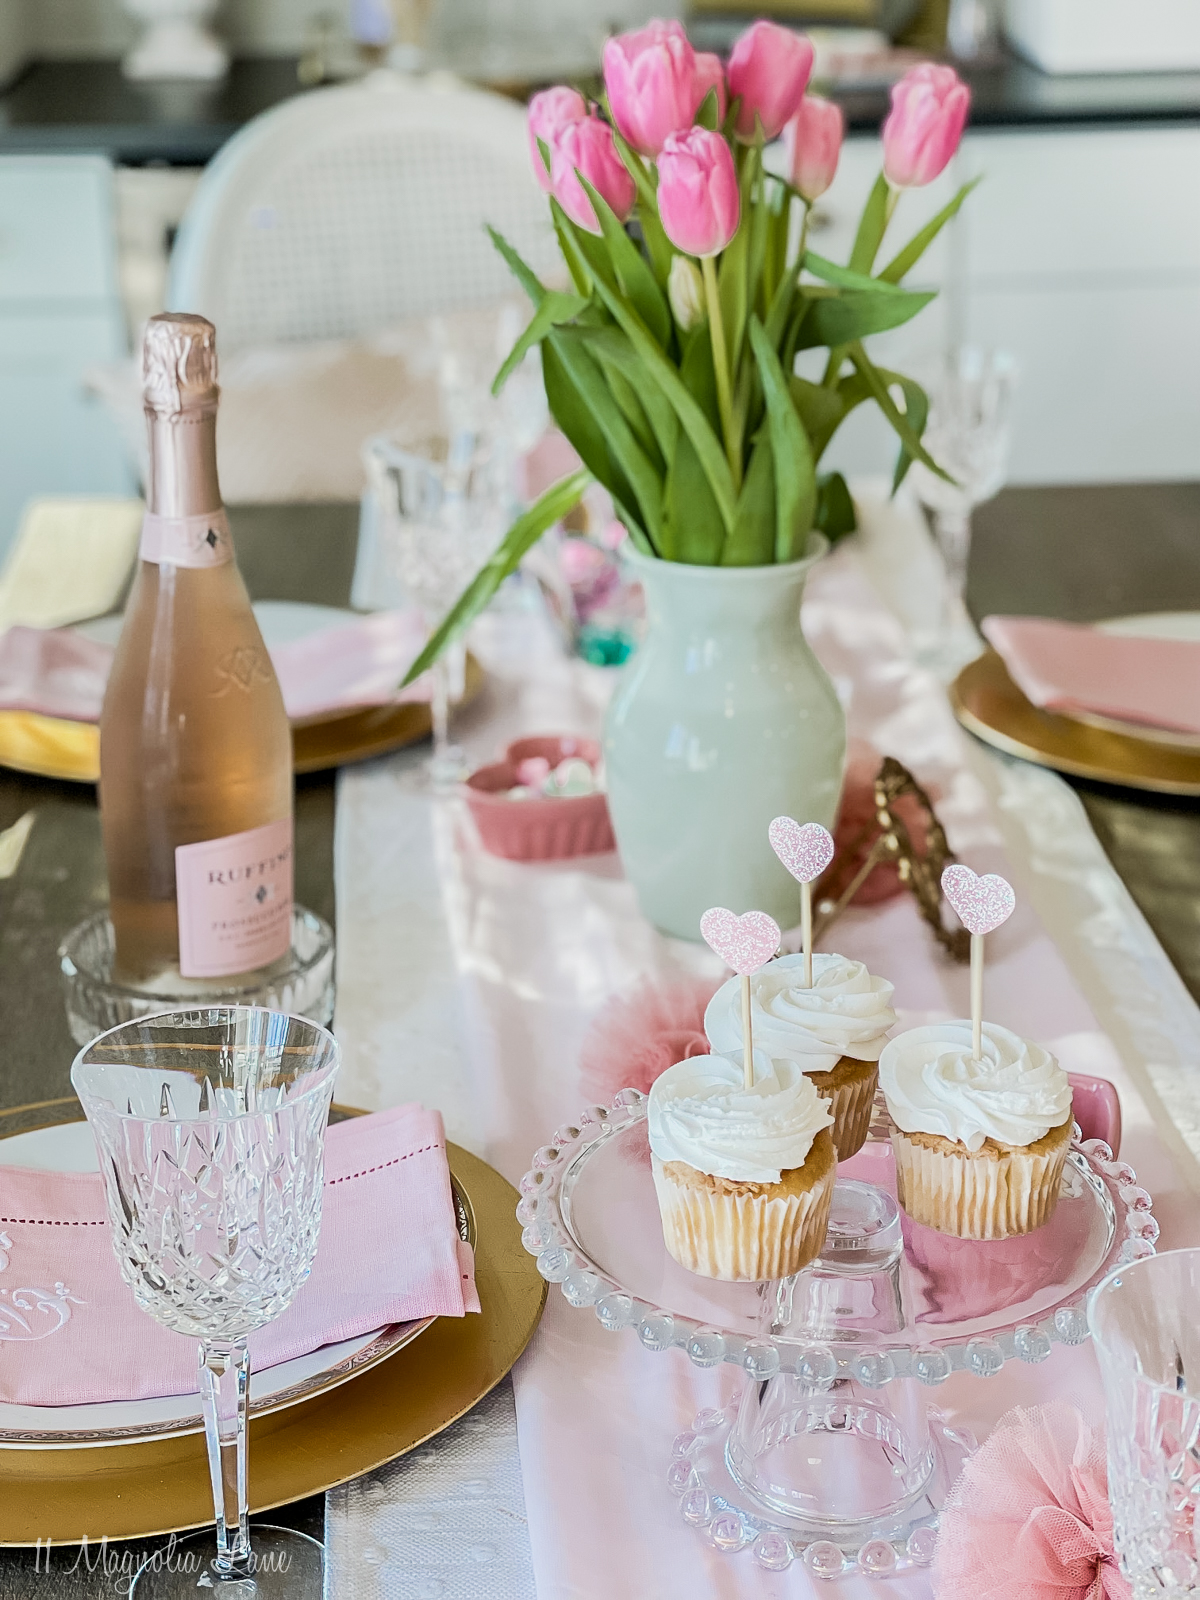 Easy Galentine's Menu to celebrate with the girls